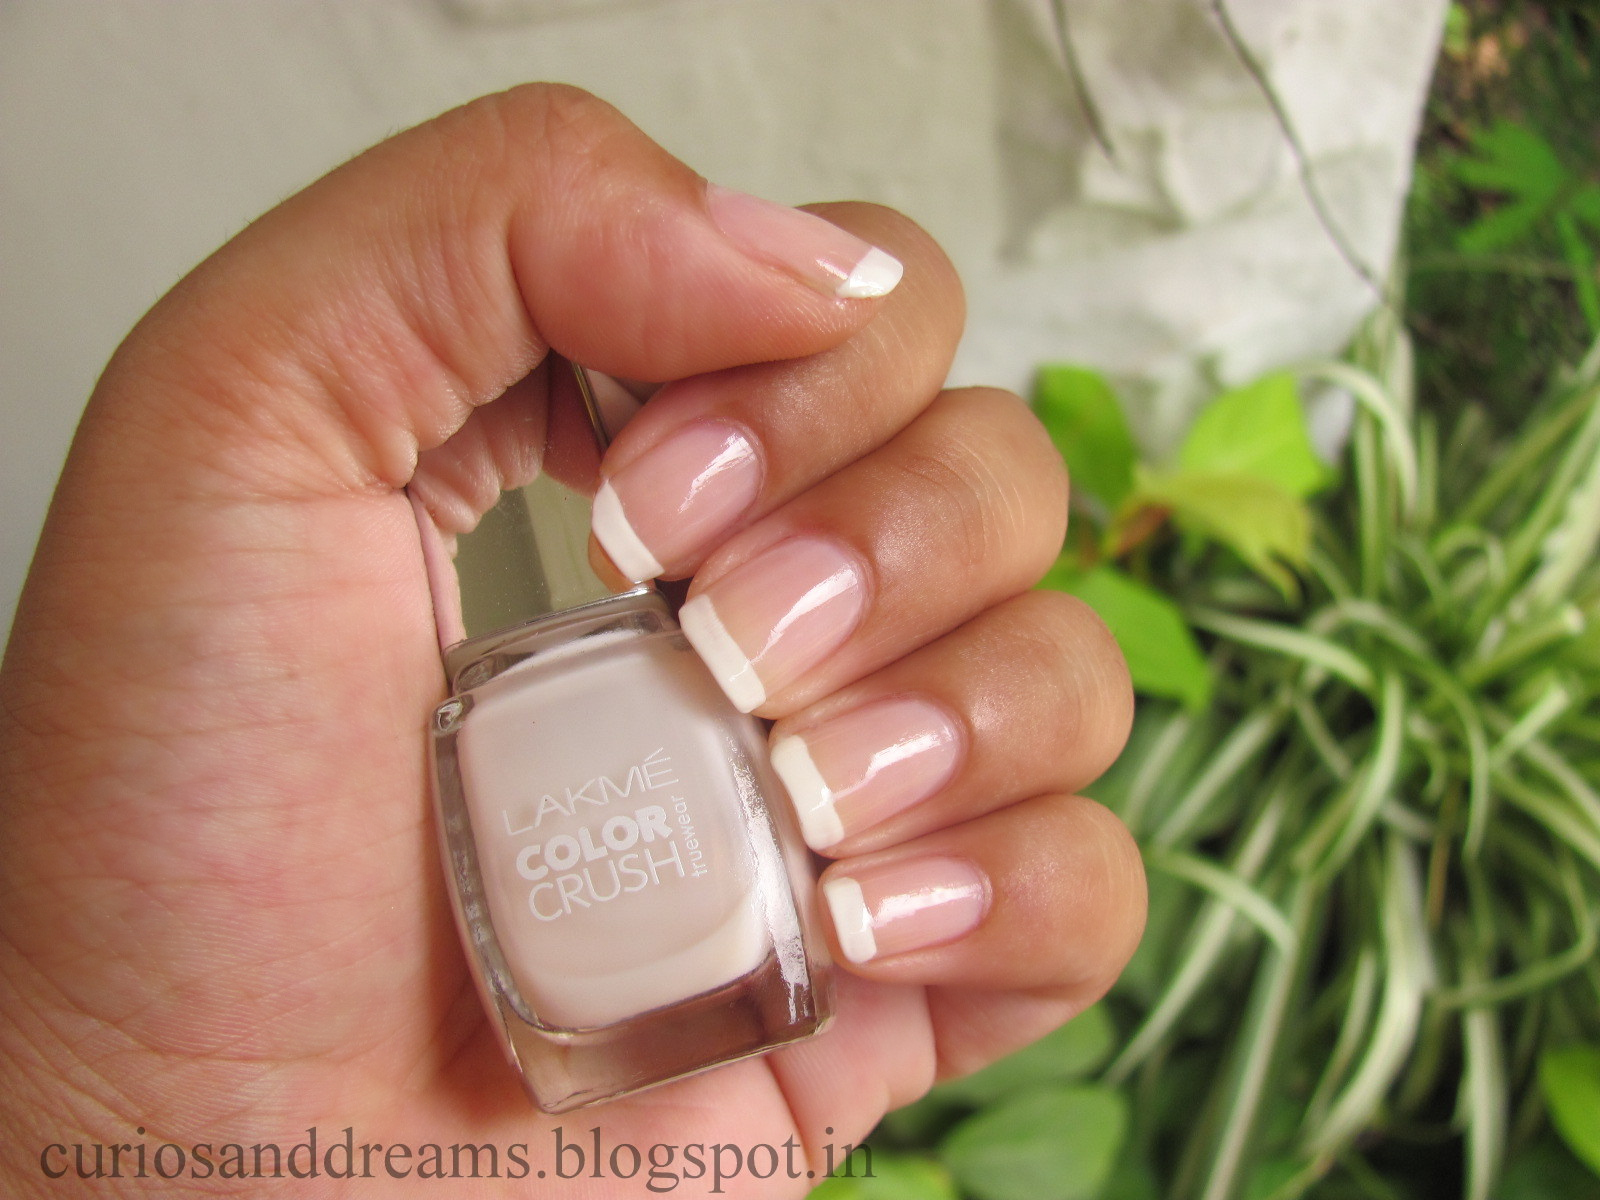 Lakme color crush no 26, Lakme color crush no 26 review, french manicure